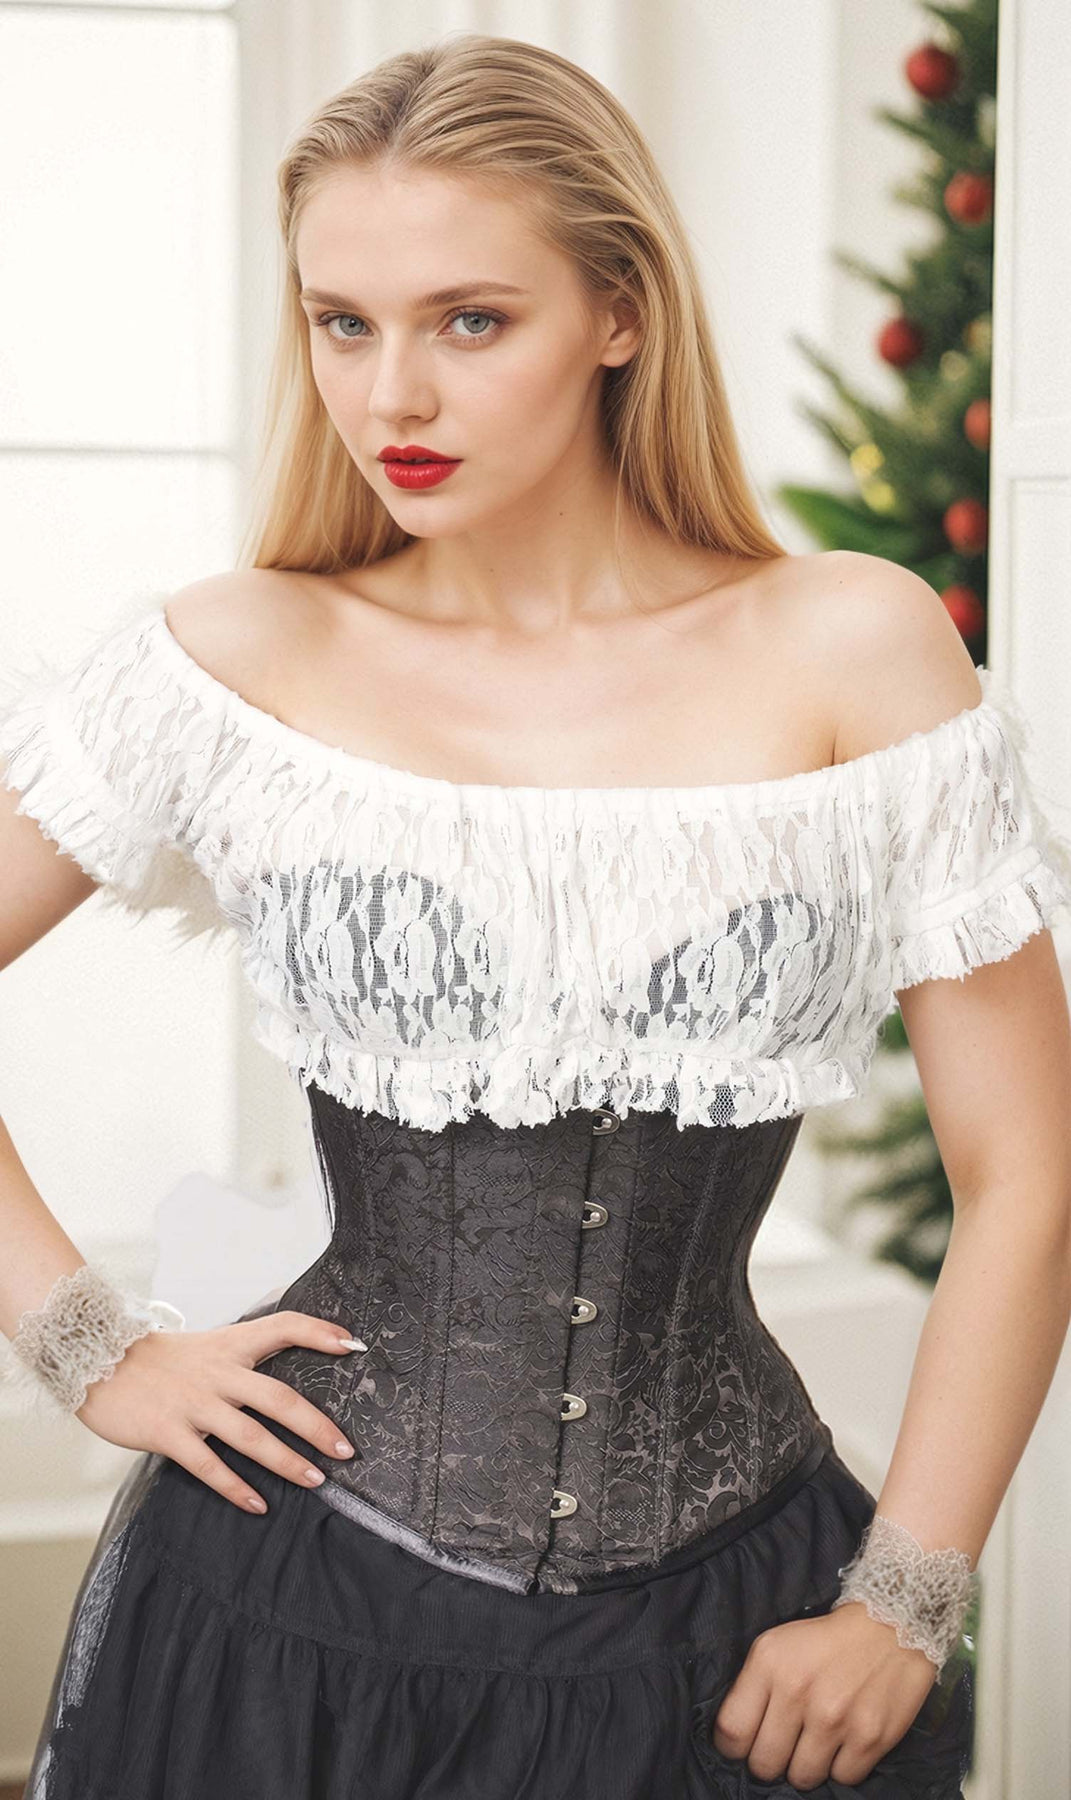 Choose the best designs of Custom Made Corsets & Steampunk Corset here